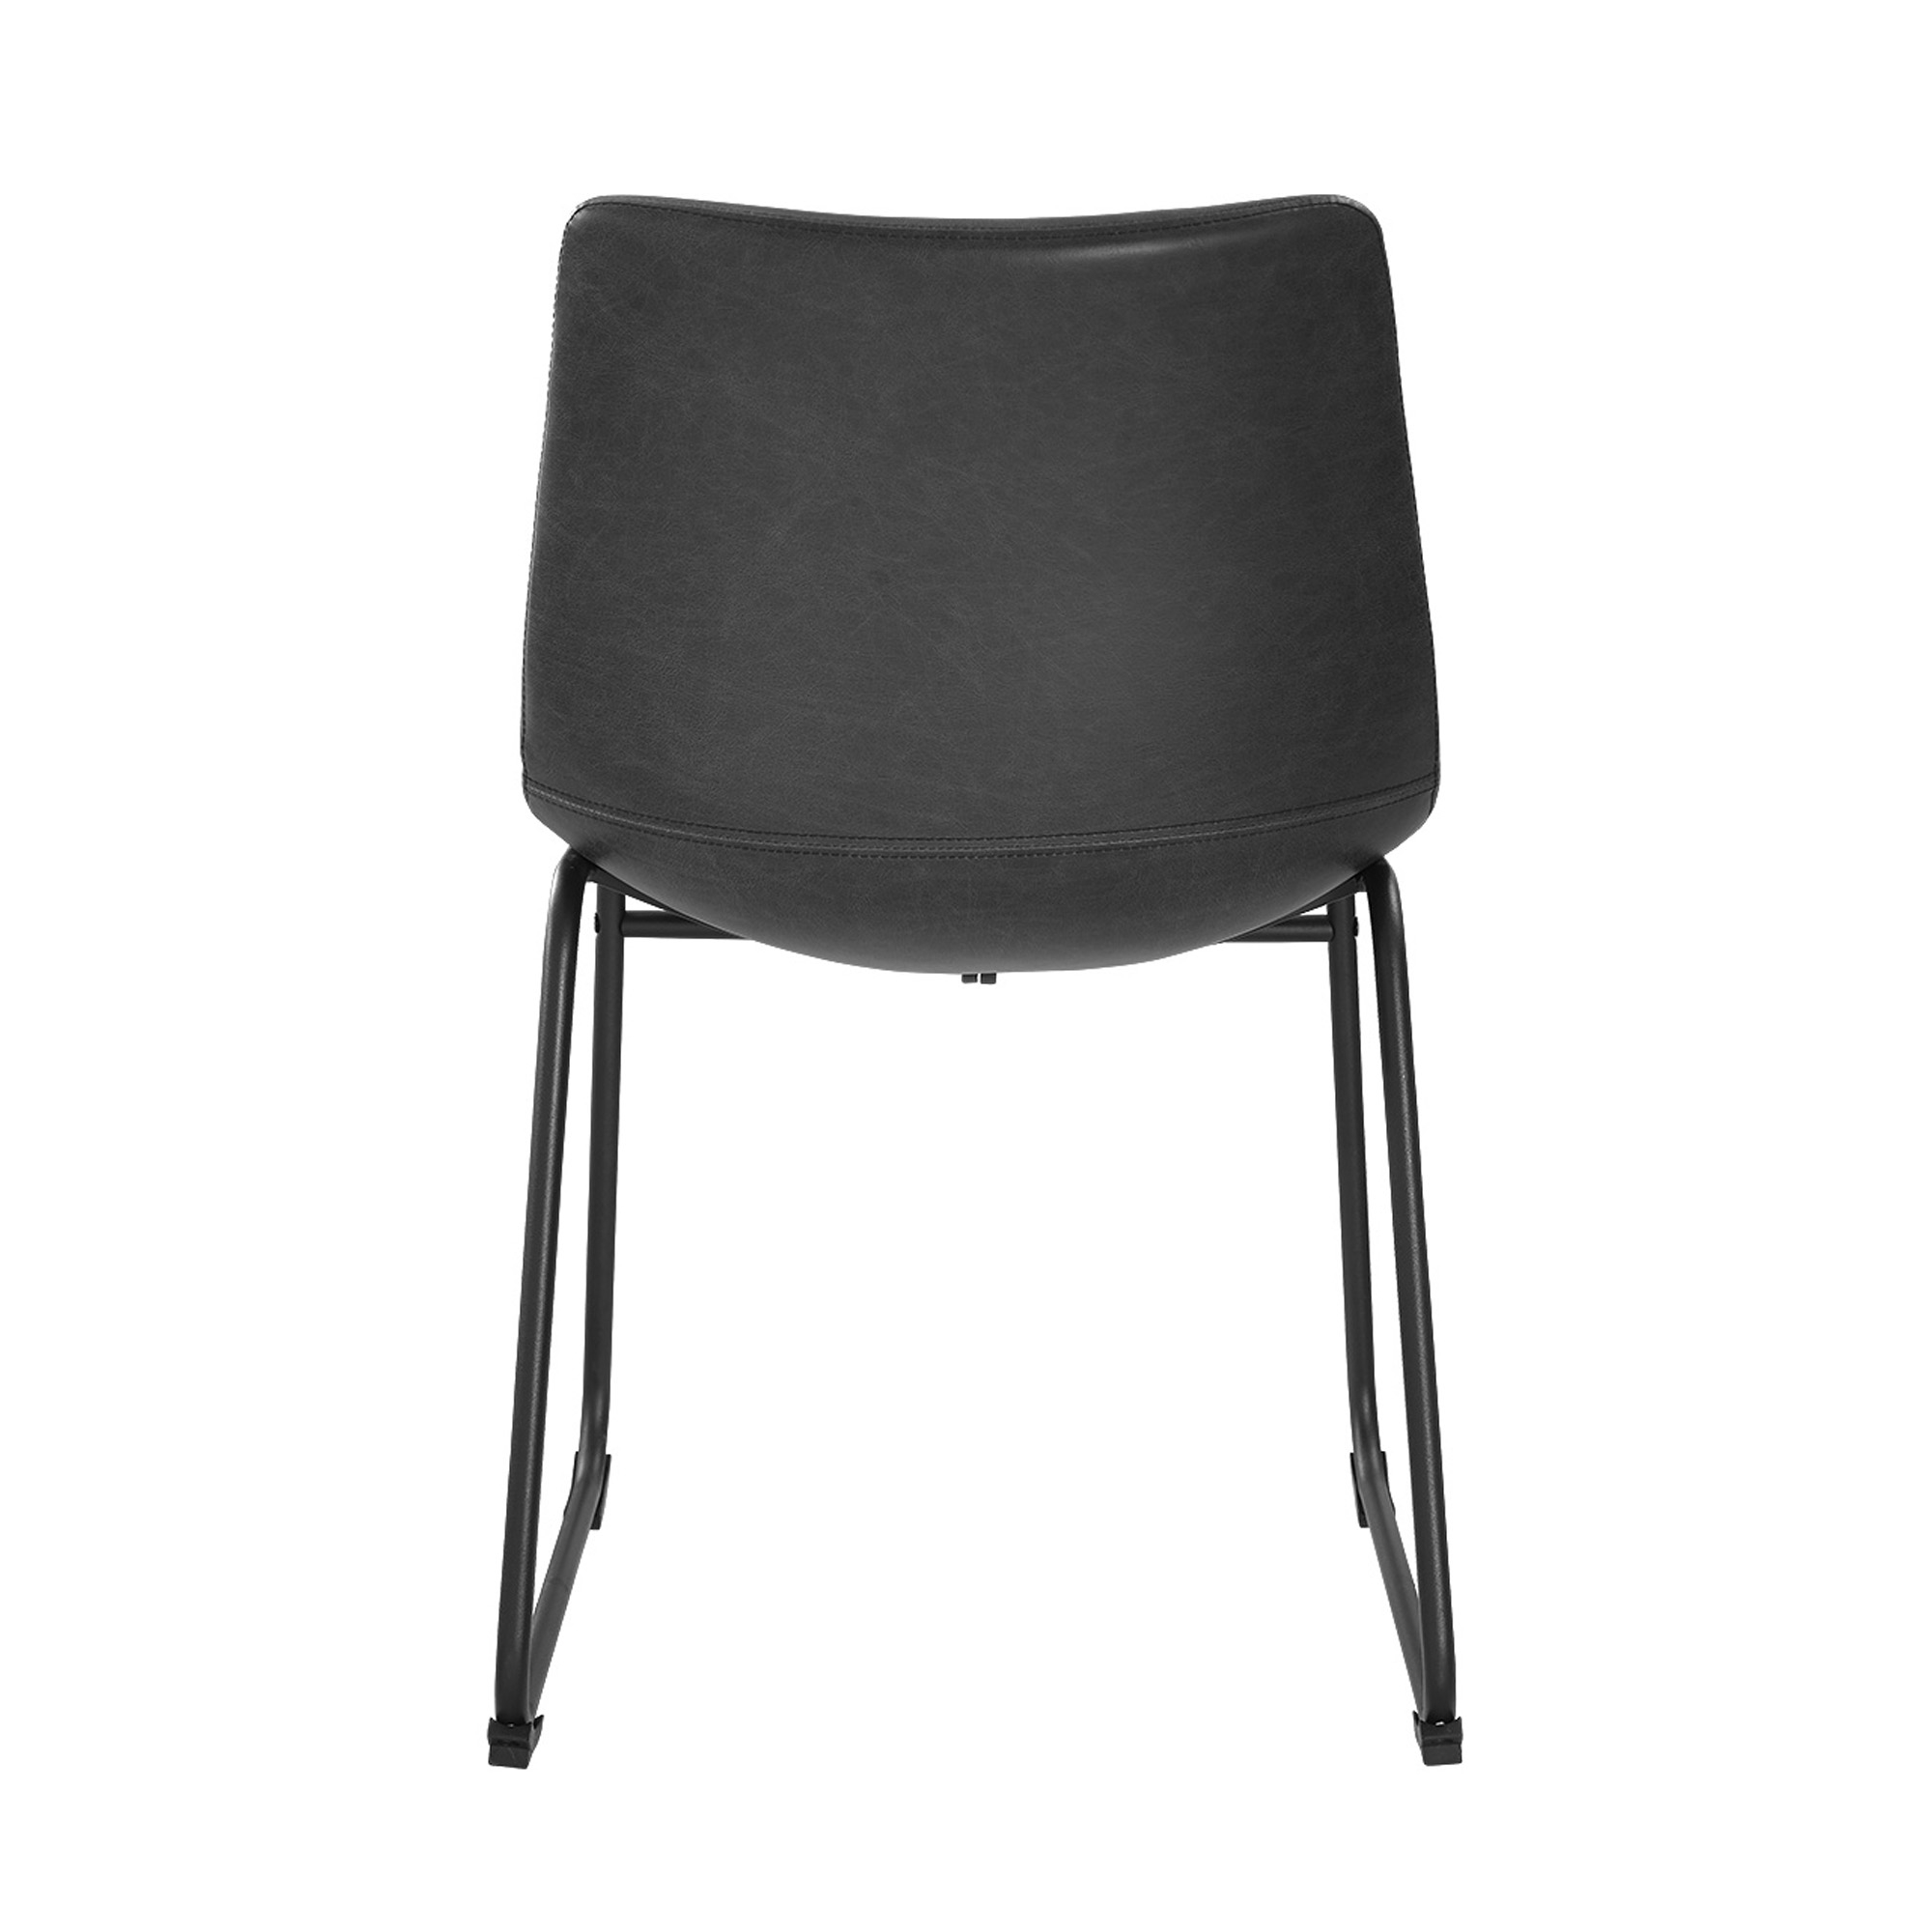 18" Industrial Faux Leather Dining Chair, Set of 2 - Black - Image 3